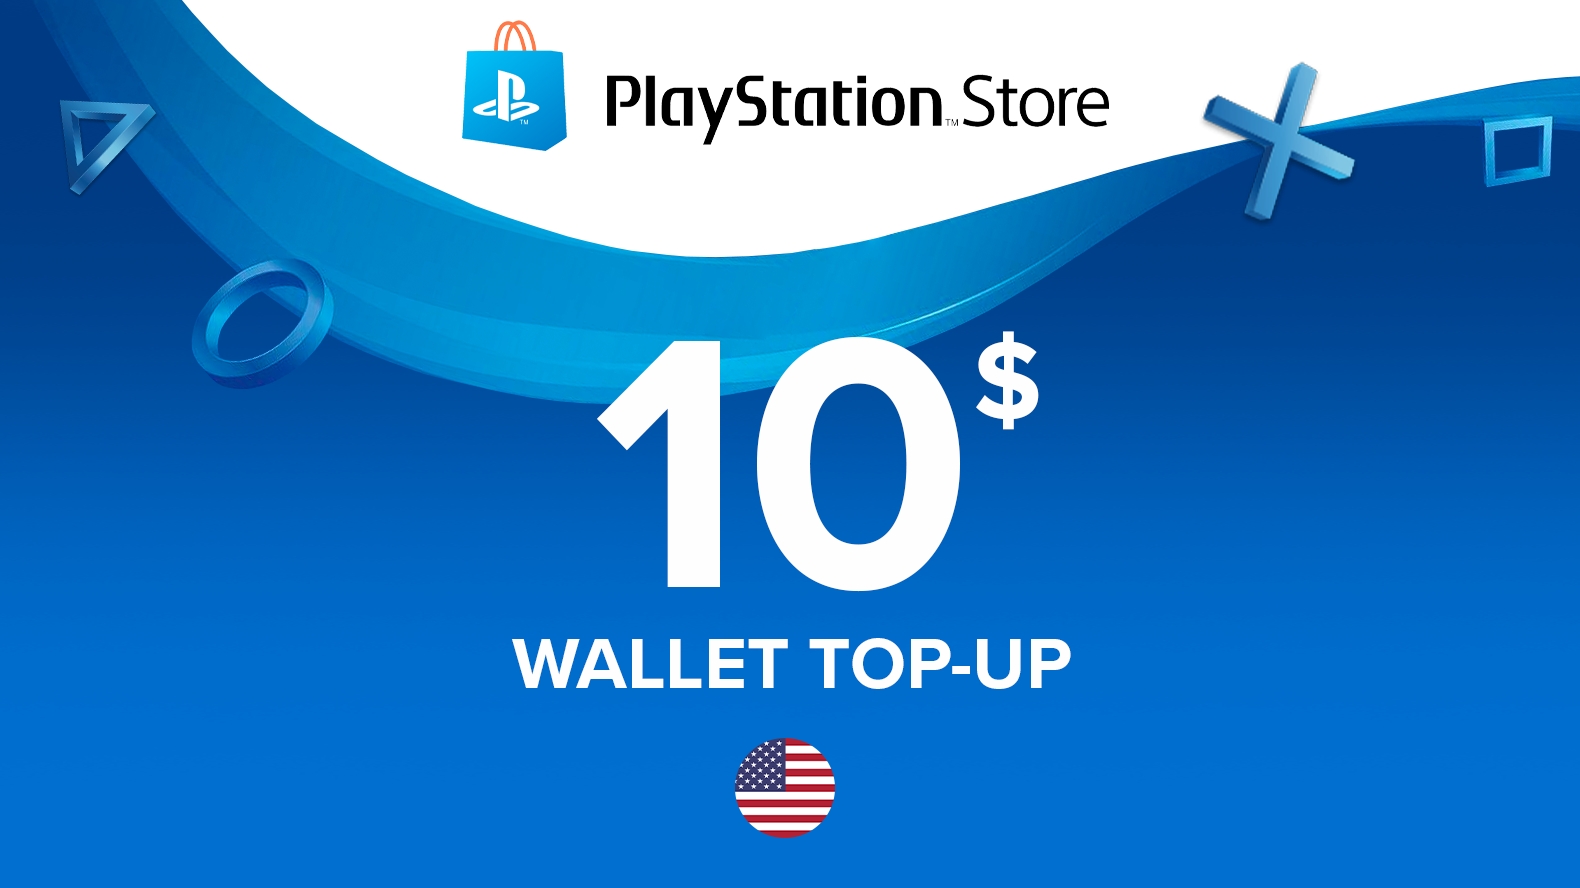 Buy PlayStation Store 10 GBP Gift Card, Playstation Plus